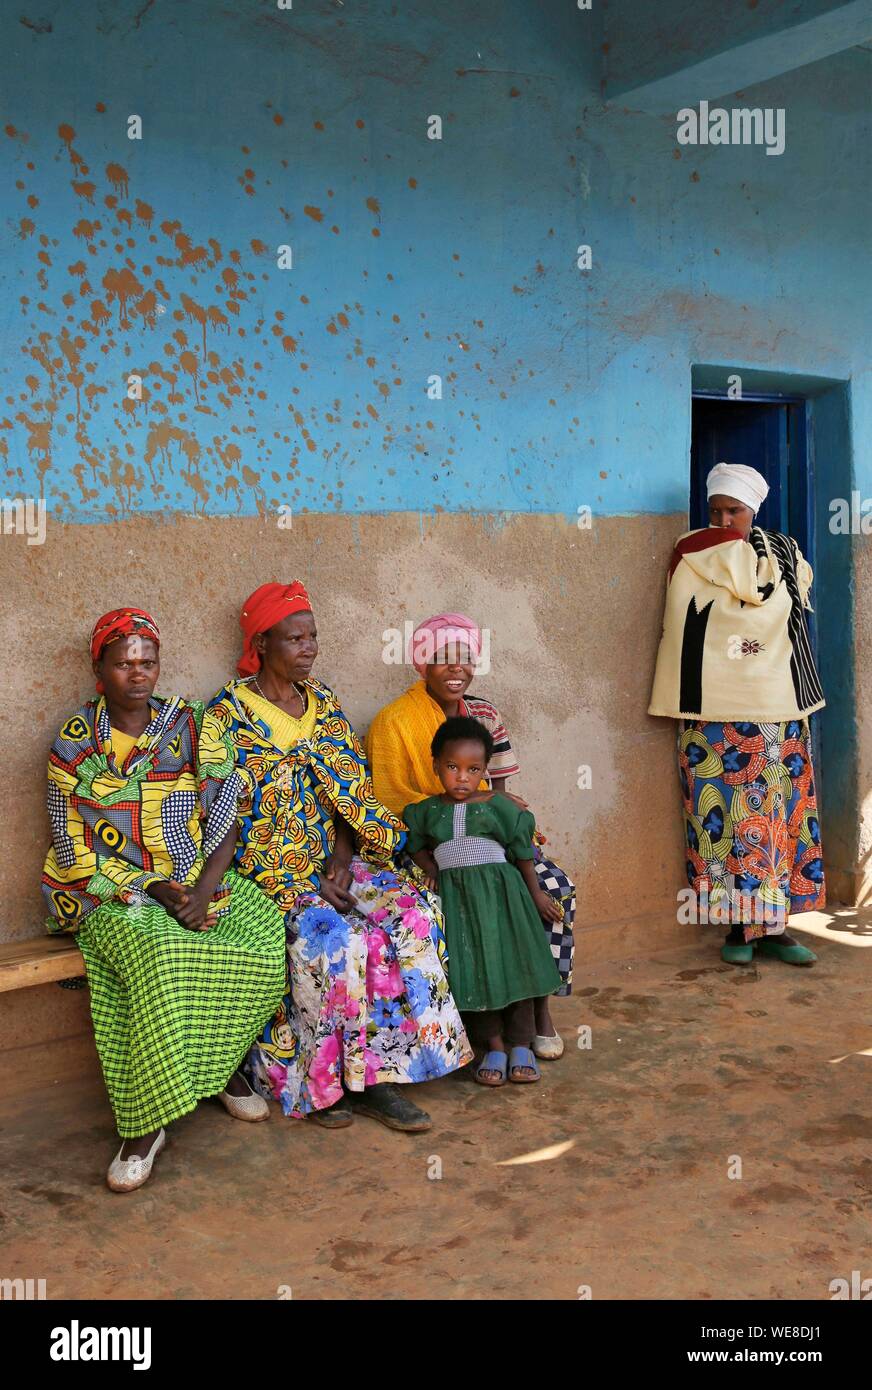 Rwanda, center of the country, villagers in colorful loincloth sitting on a bench in front of a blue wall Stock Photo